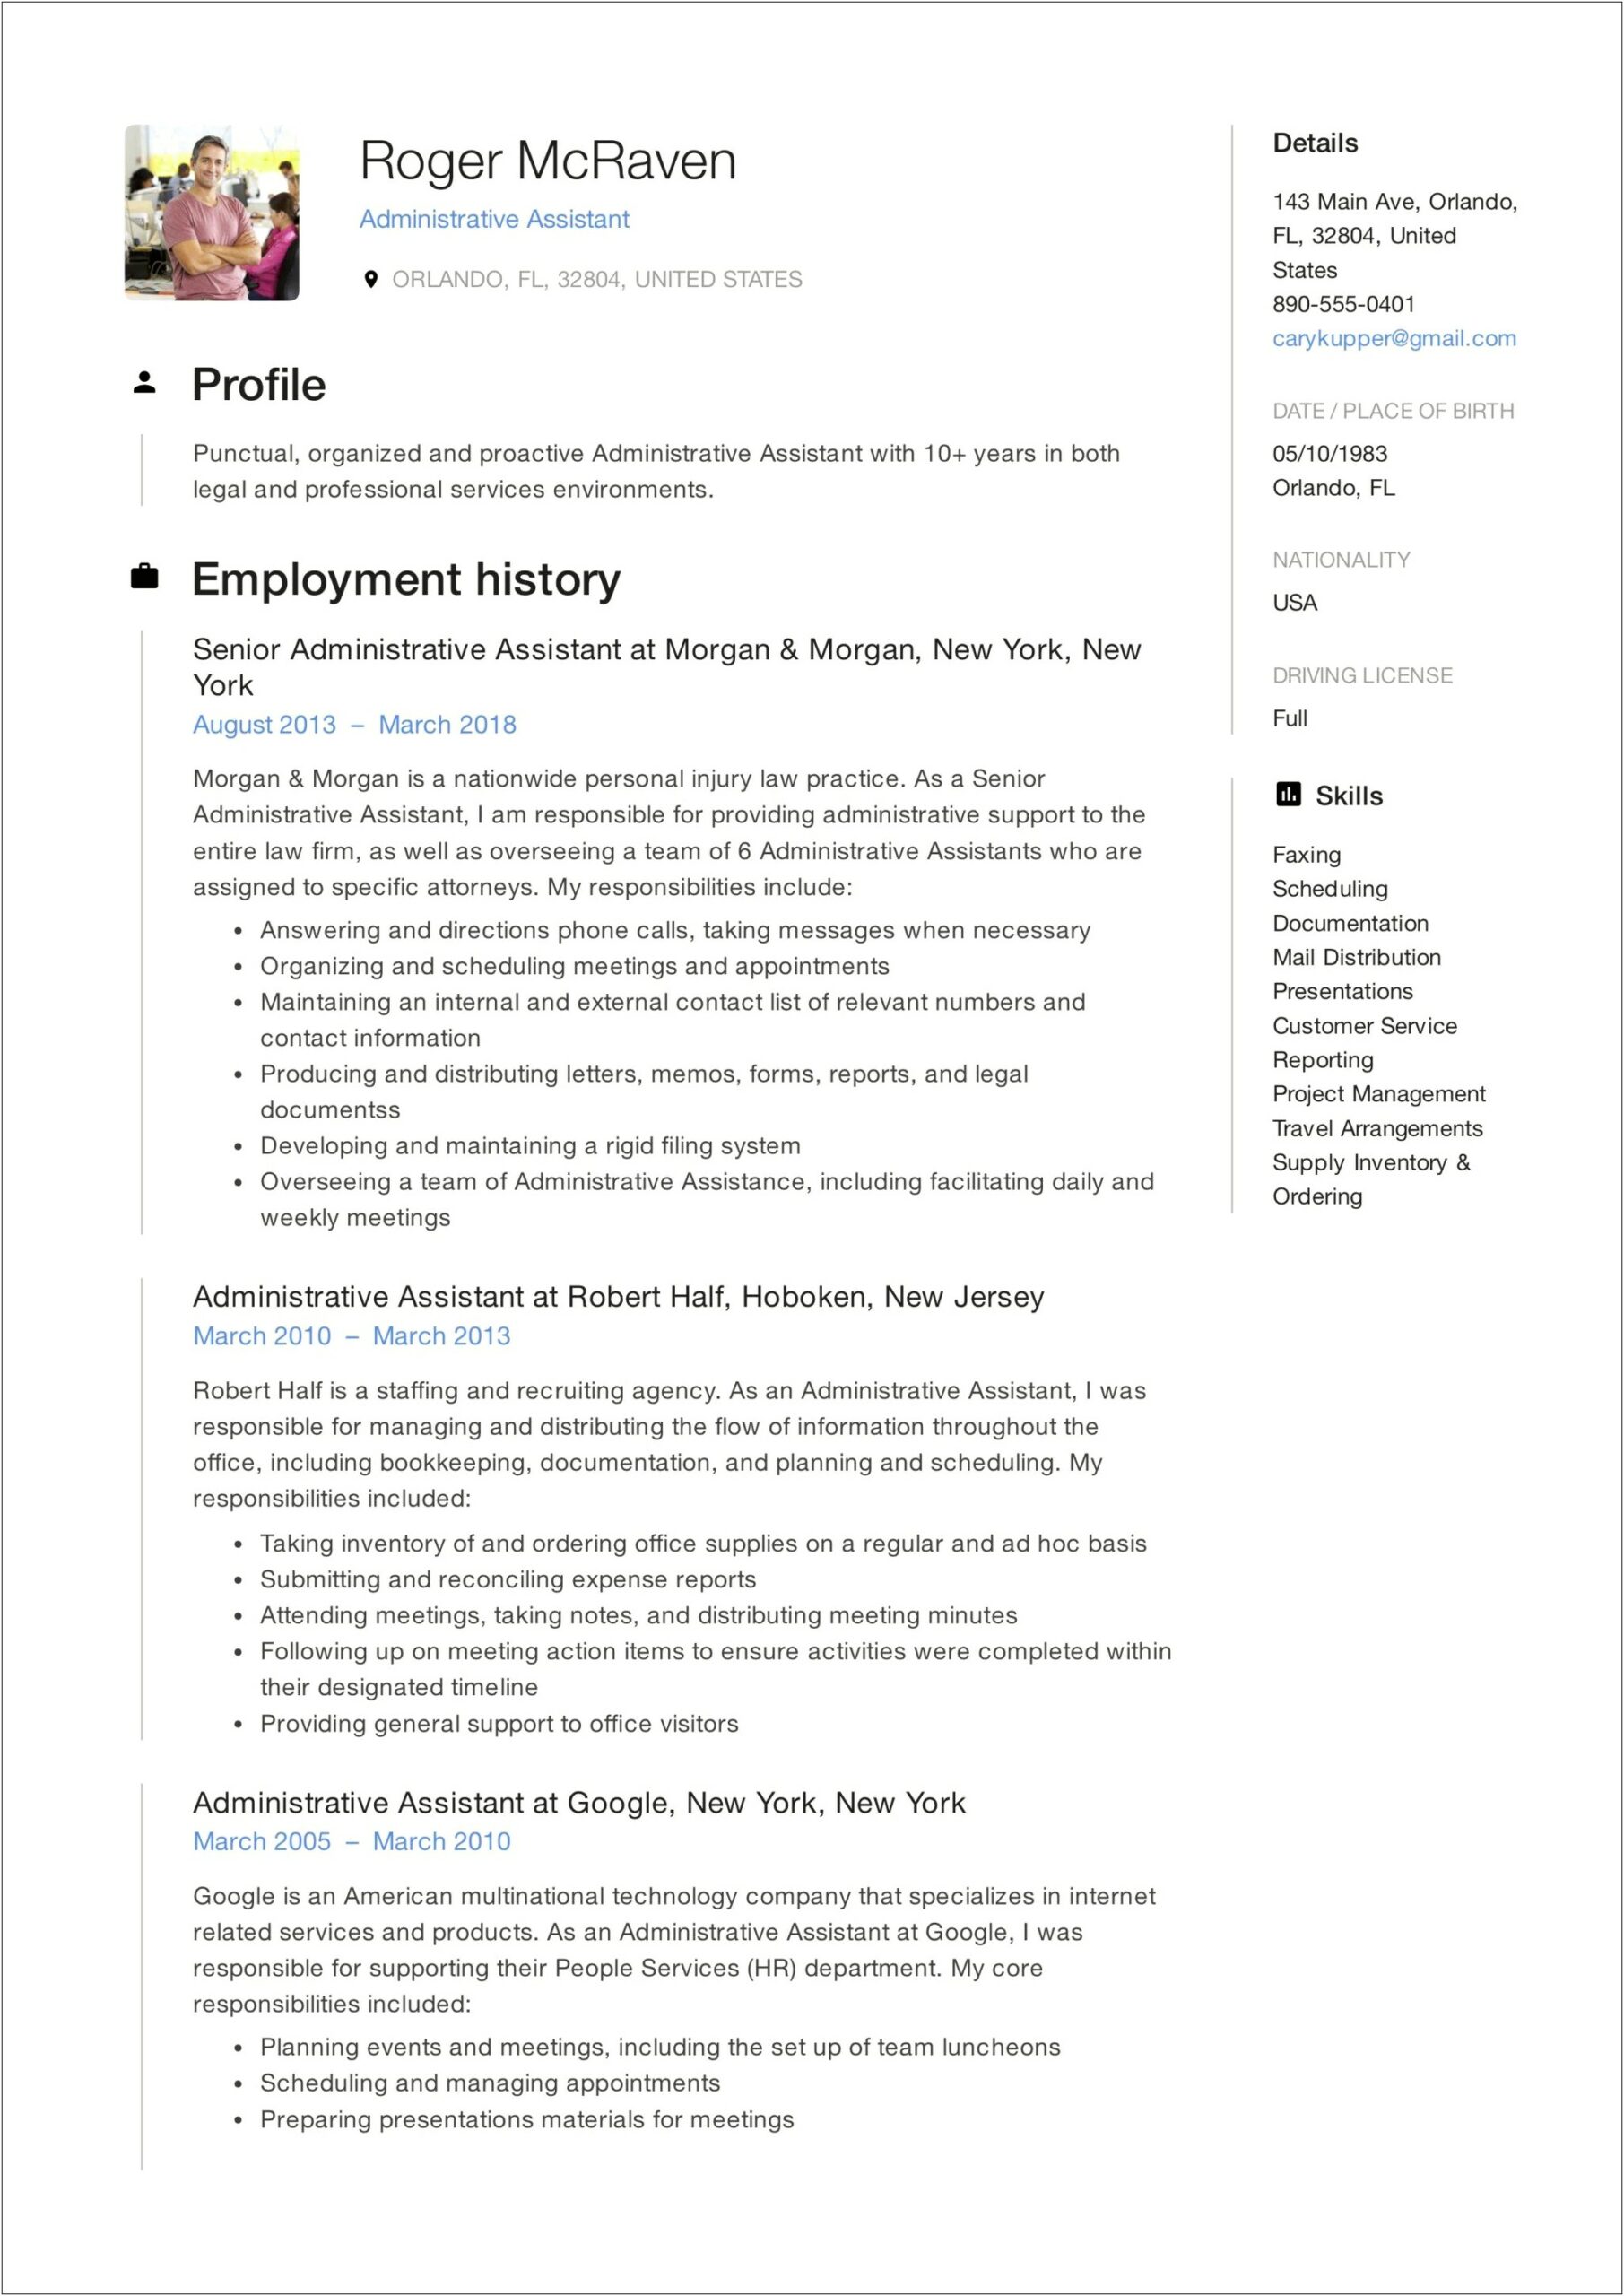 Administrative Assistant Resume Skills Section